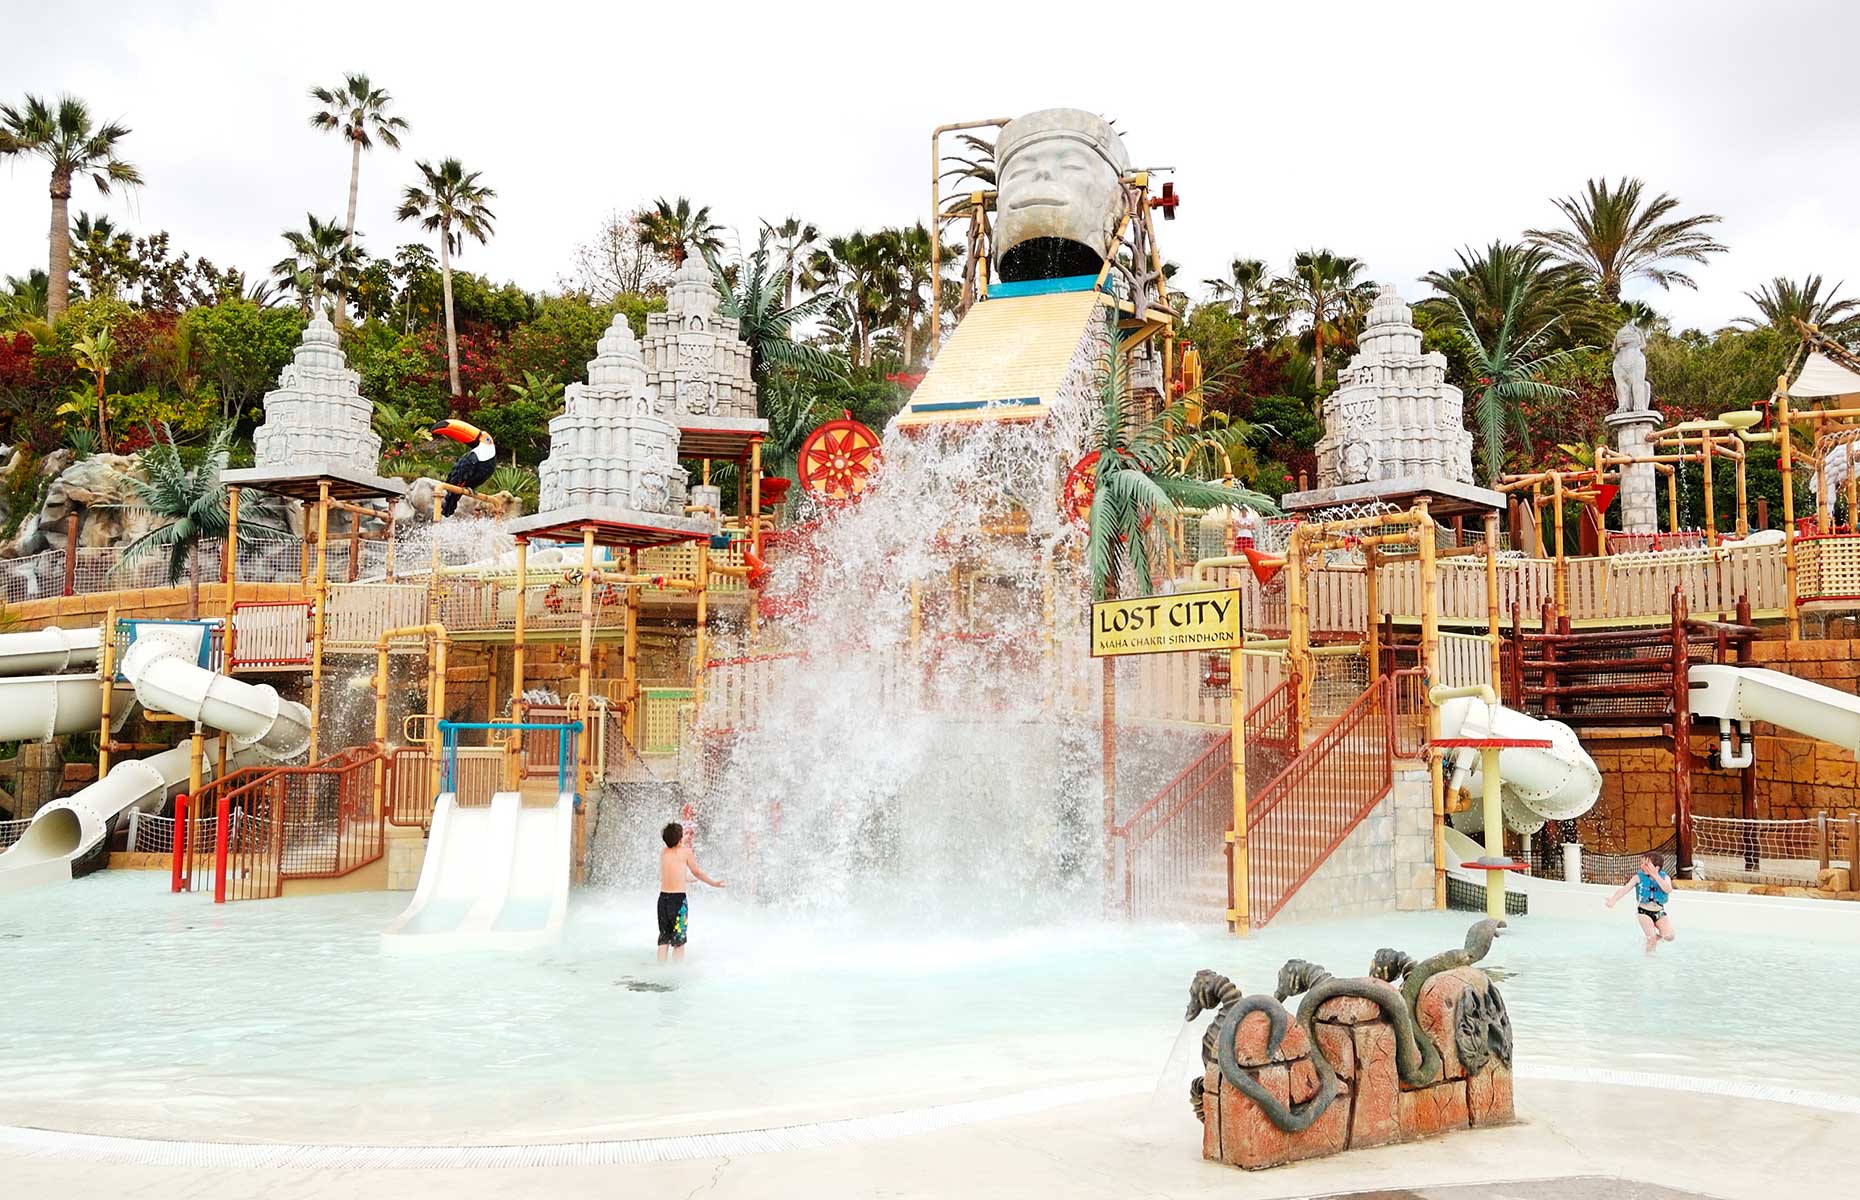 Siam Park, on Tenerife in the Canary Islands is one of the world's leading water parks